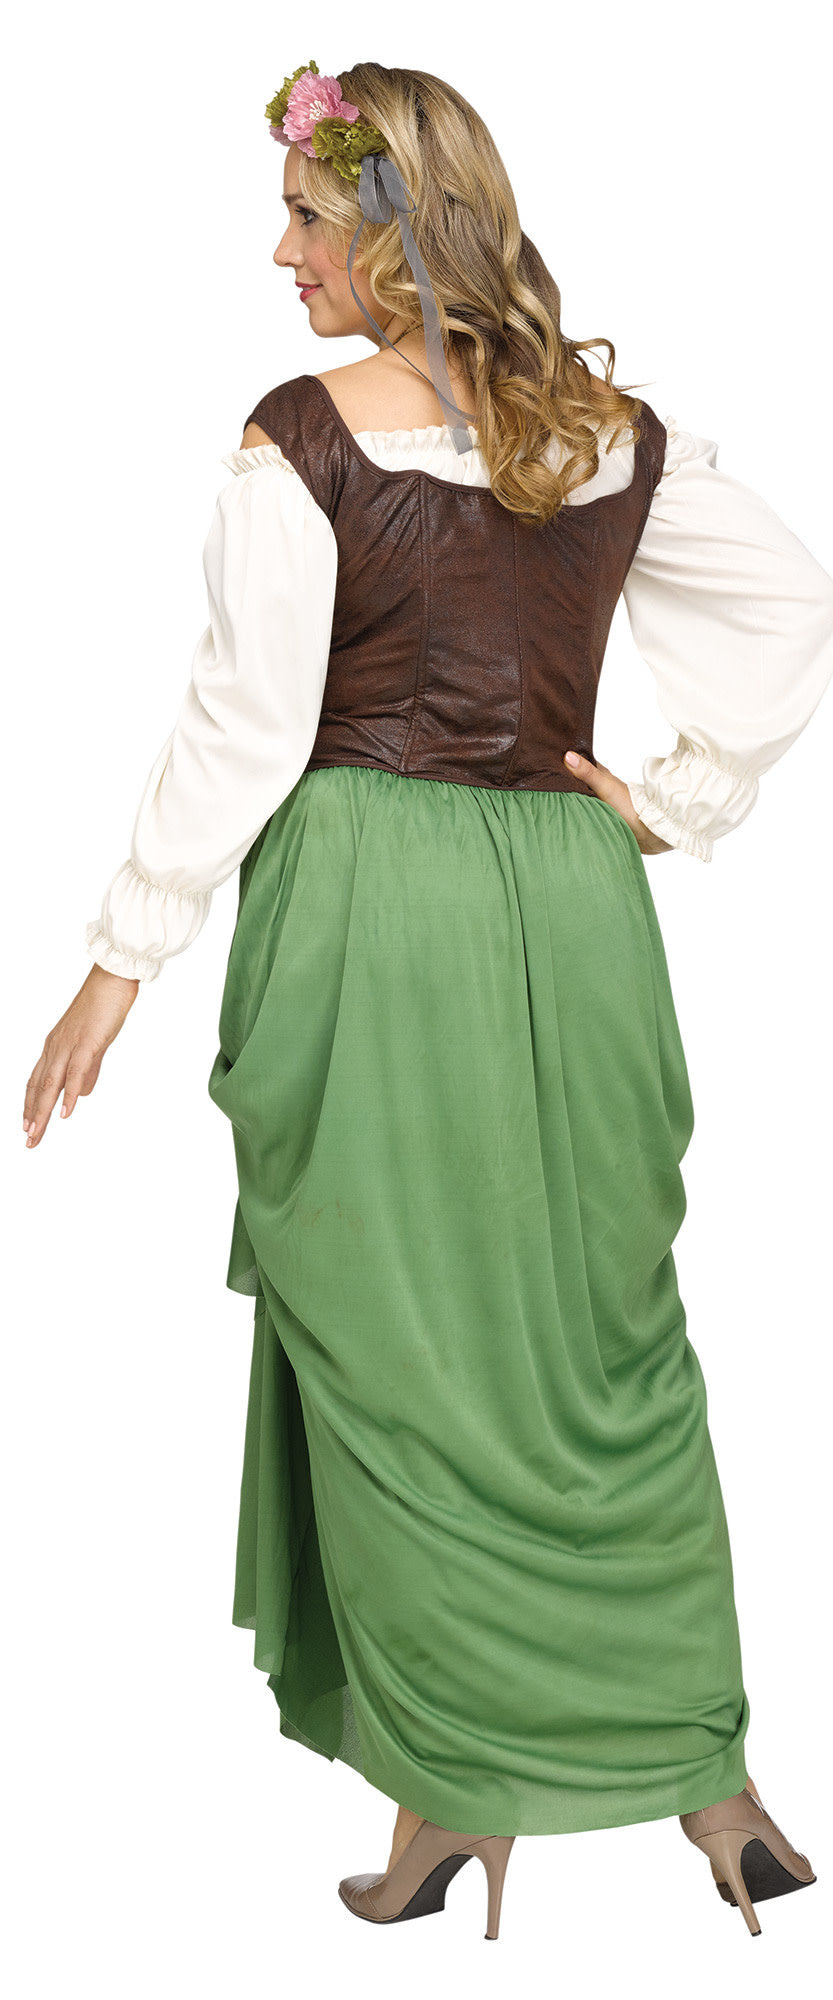 Women's Plus Size Wench Costume